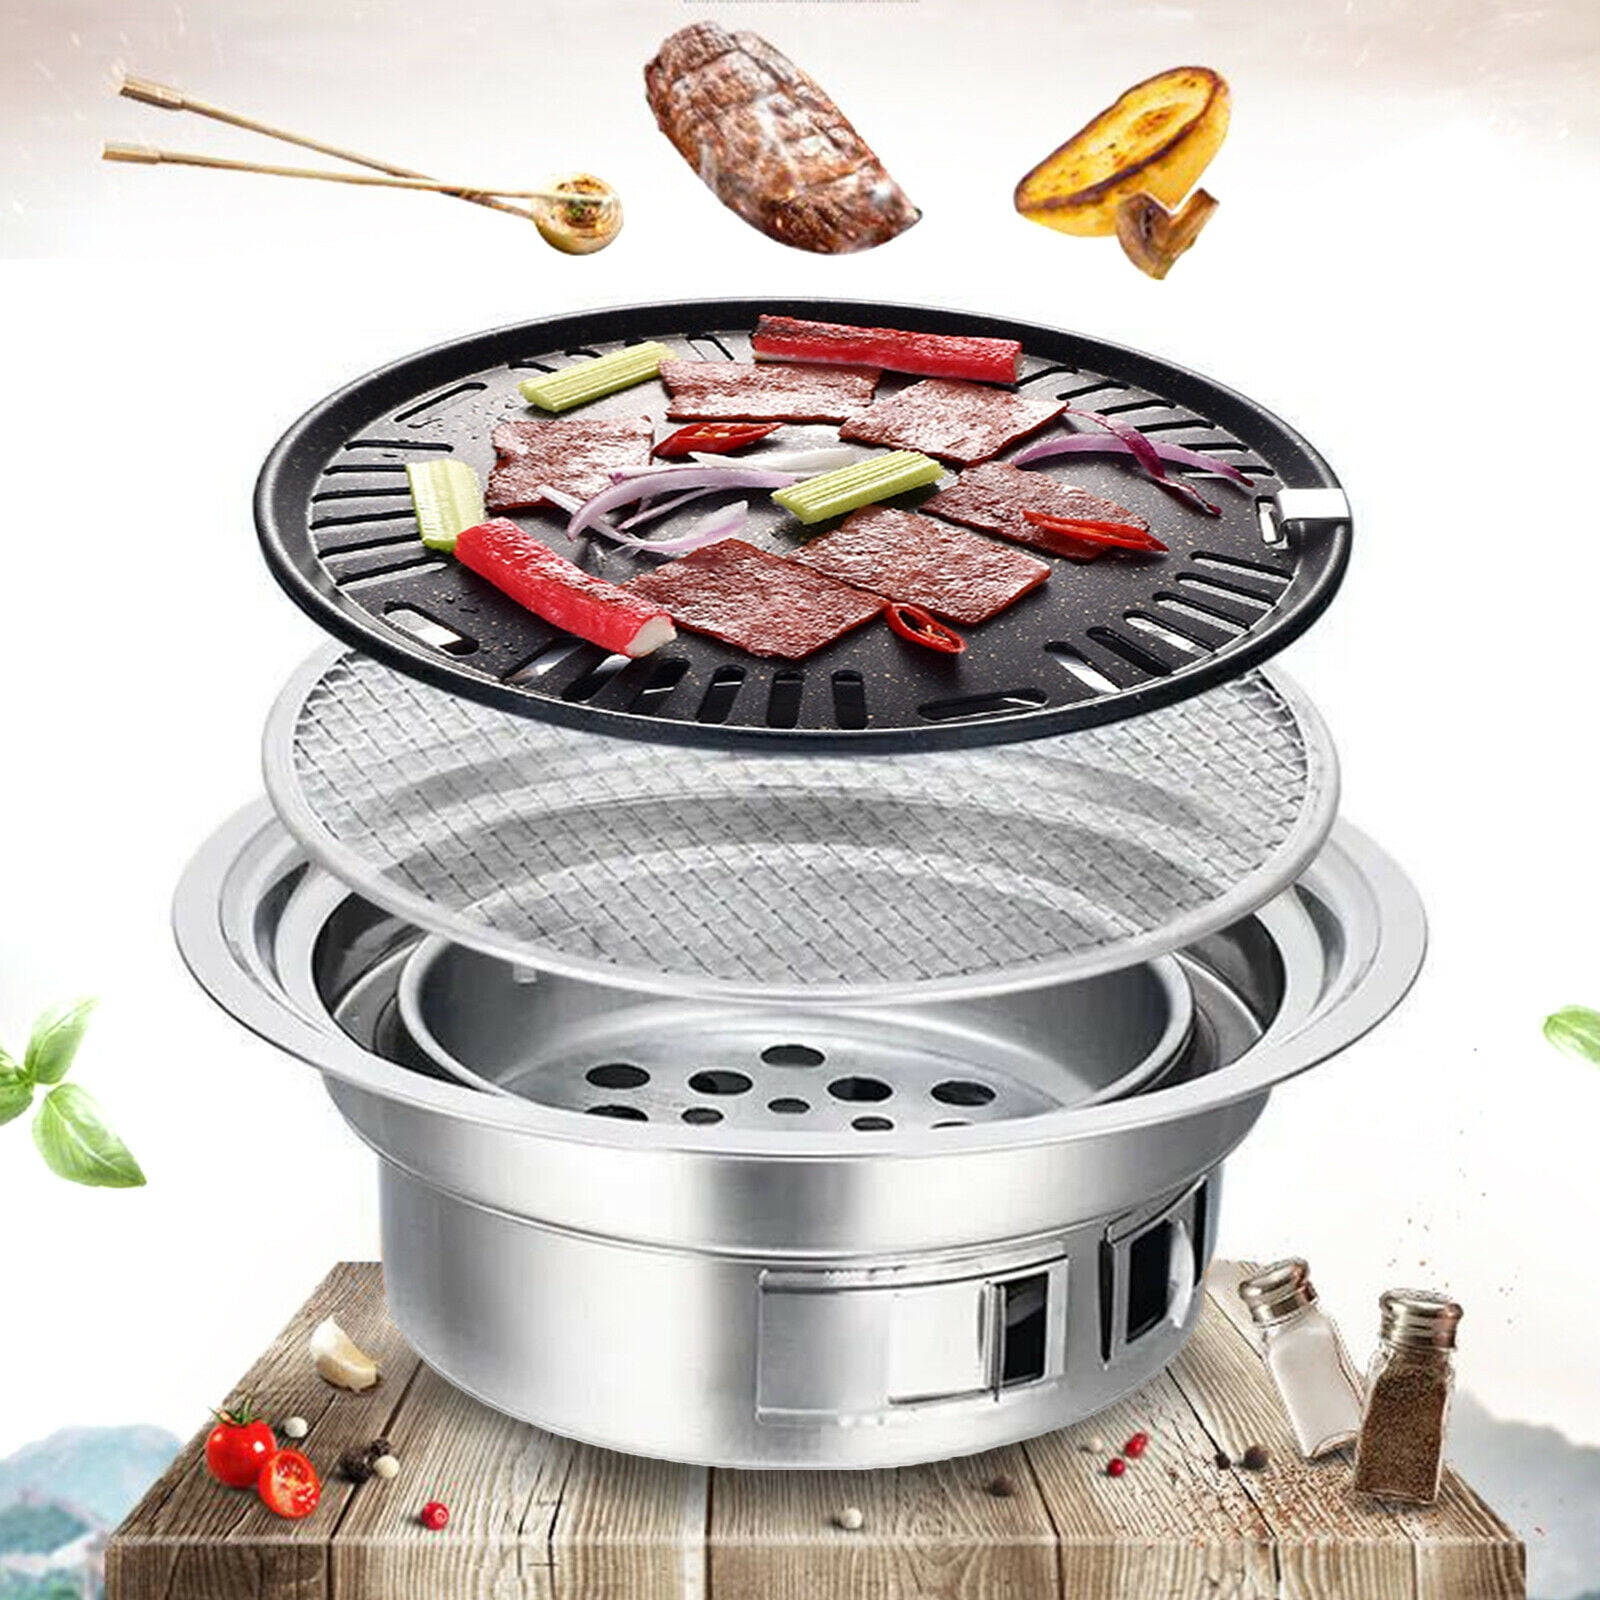 30cm Multifunctional Charcoal Barbecue Grill 13.7in Household Korean BBQ Grill Stainless Steel Non-stick Charcoal Stove 